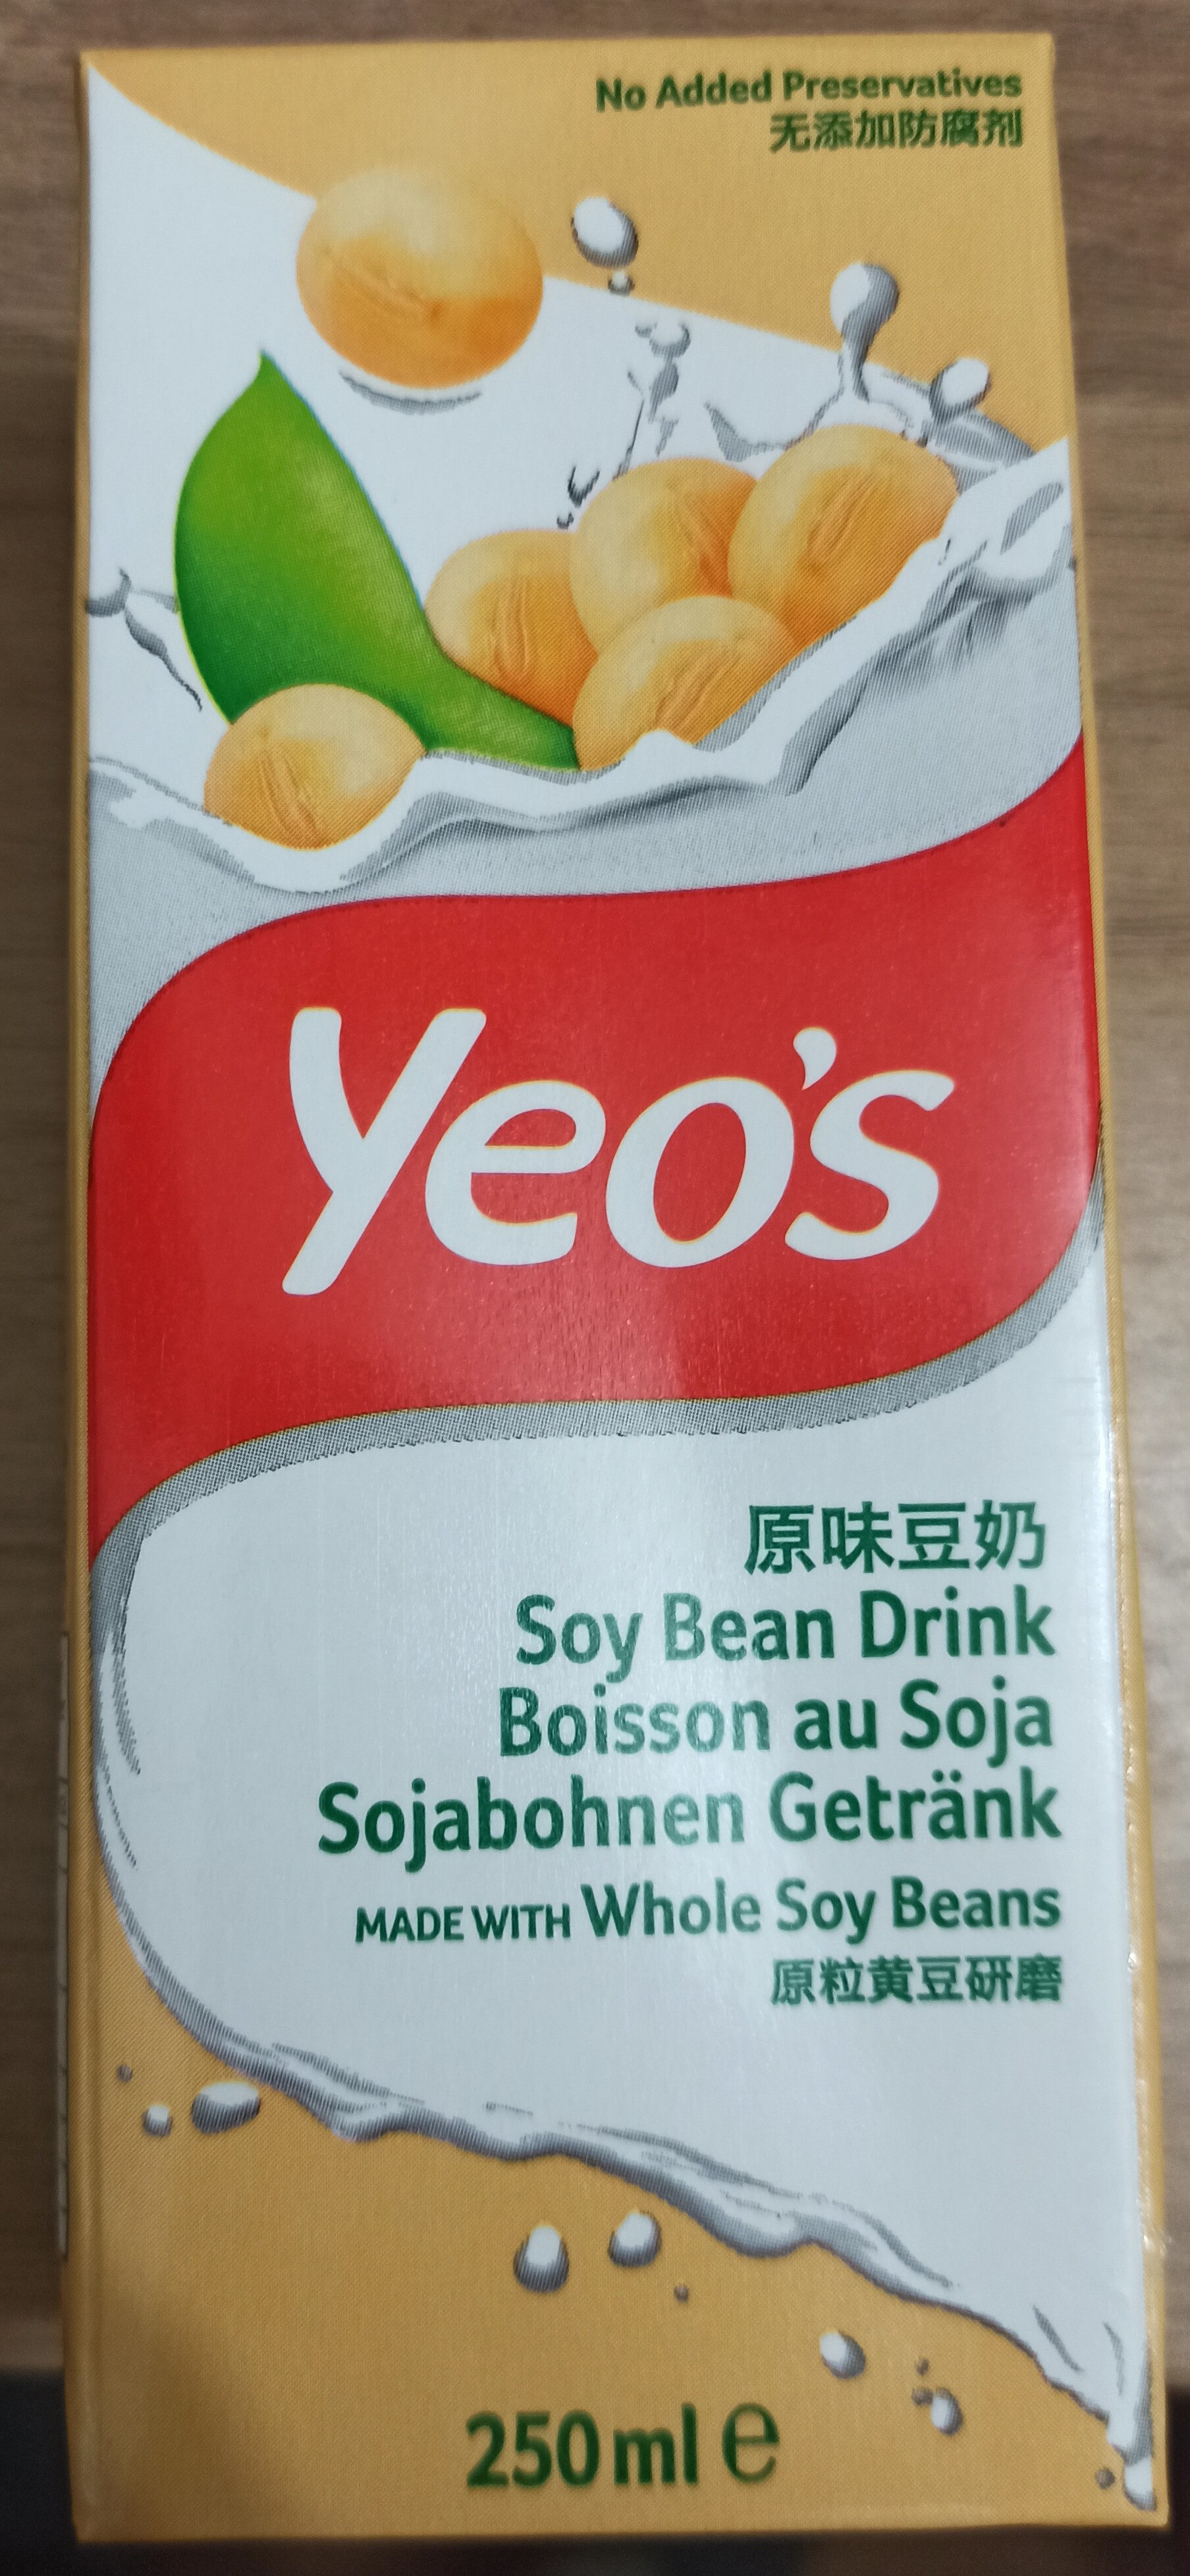 Soy bean drink - Product - fr